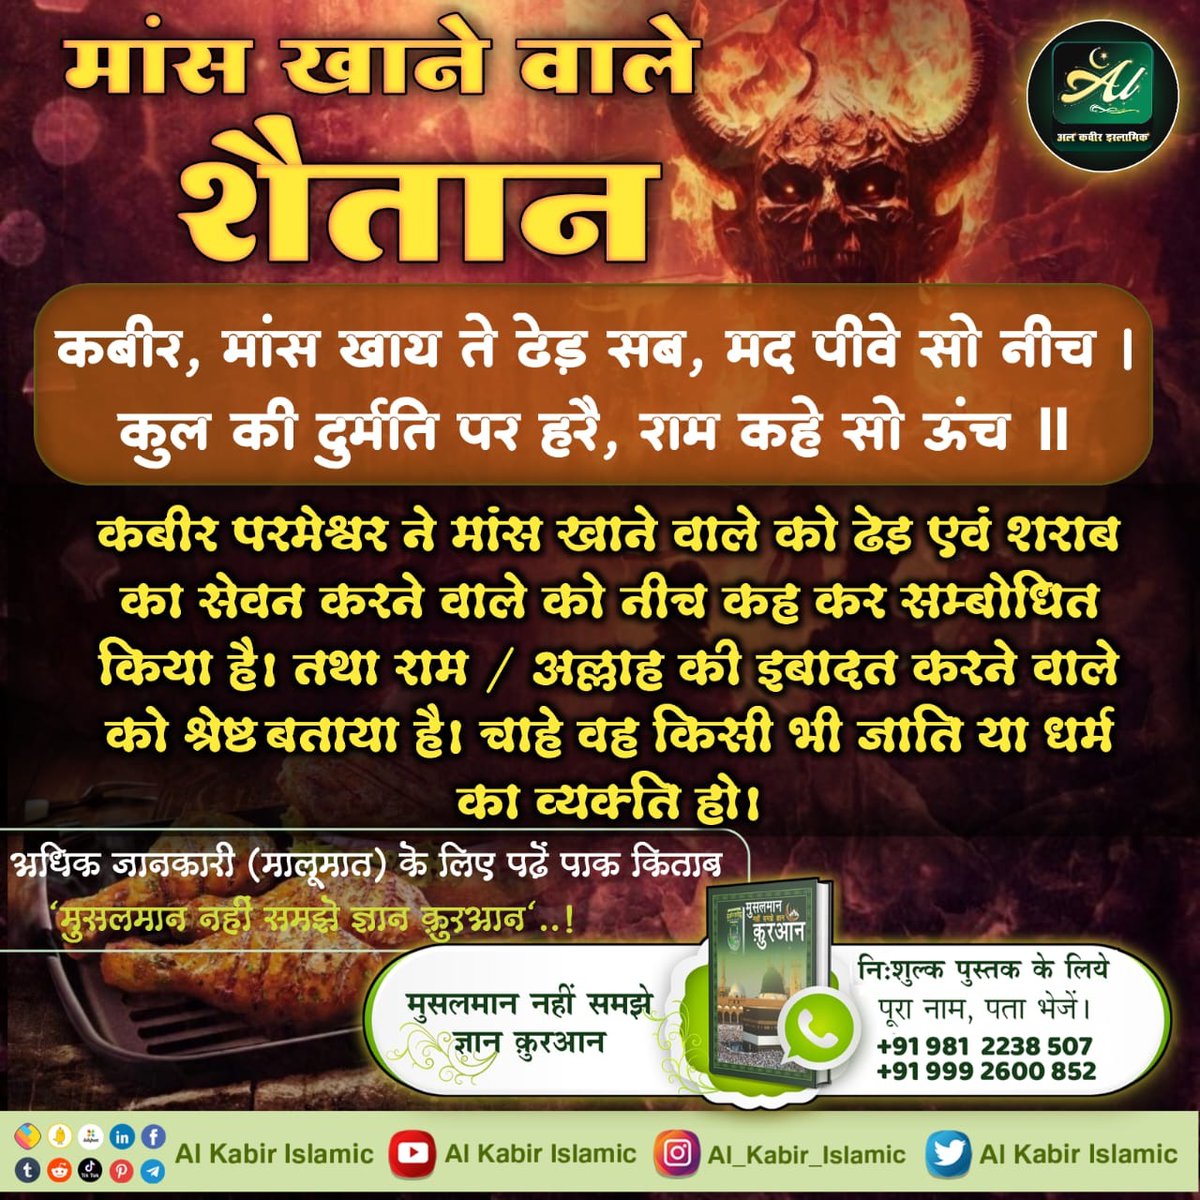 #रहम_करो_मूक_जीवों_पर Hindu or Muslim meat eater devil God Kabir has said that Hindus commit violence with a jolt. Muslims kill creatures slowly. It is called Halal Kiya. This is sin. Both will be in bad shape.